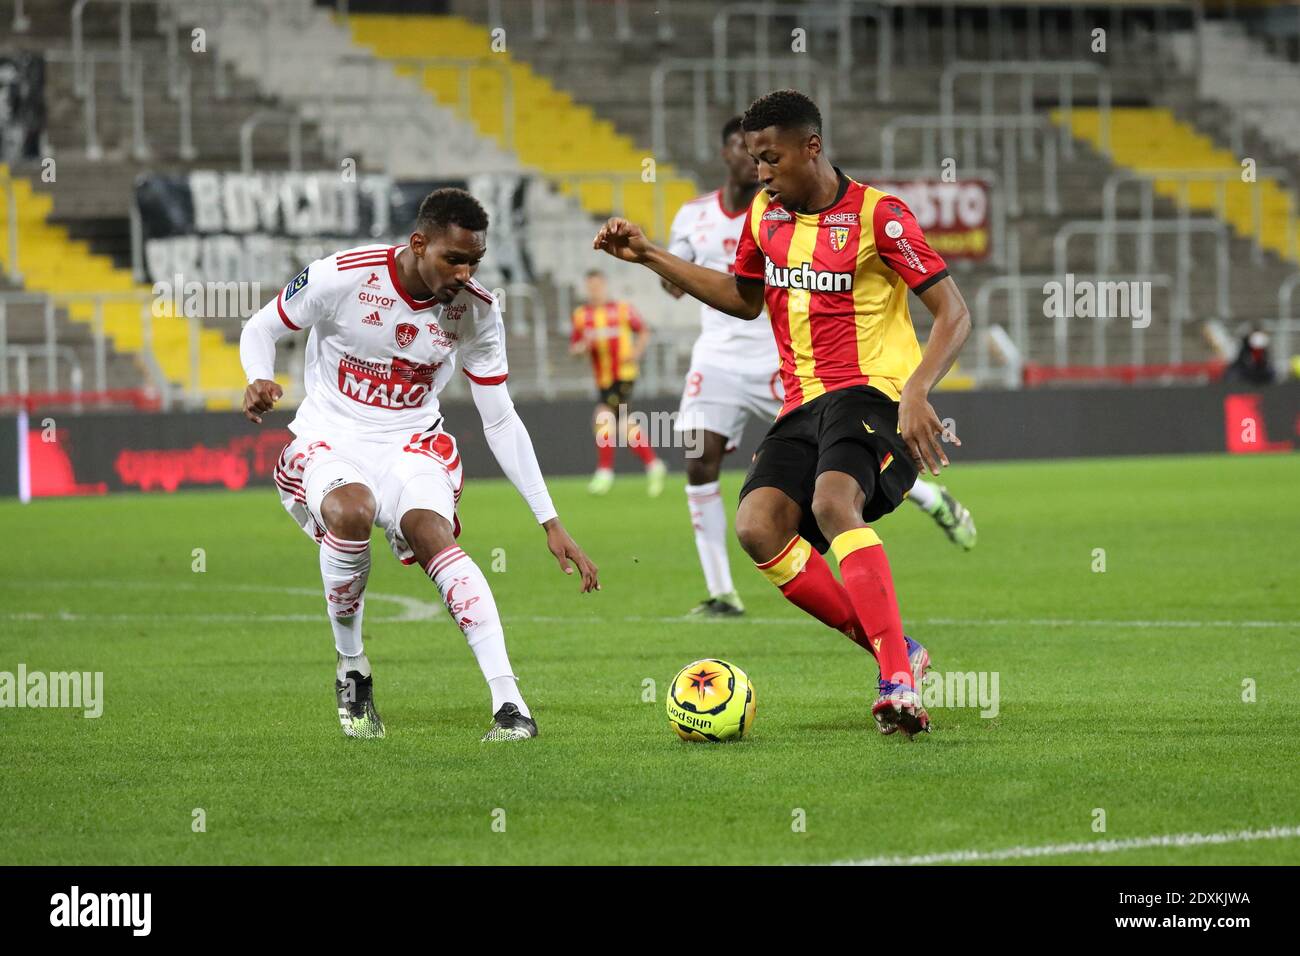 Ontslag nemen Herinnering Sportman Simon Banza 23 RC Lens during the French championship Ligue 1 football match  between RC Lens and Stade brestois 29 on December / LM Stock Photo - Alamy